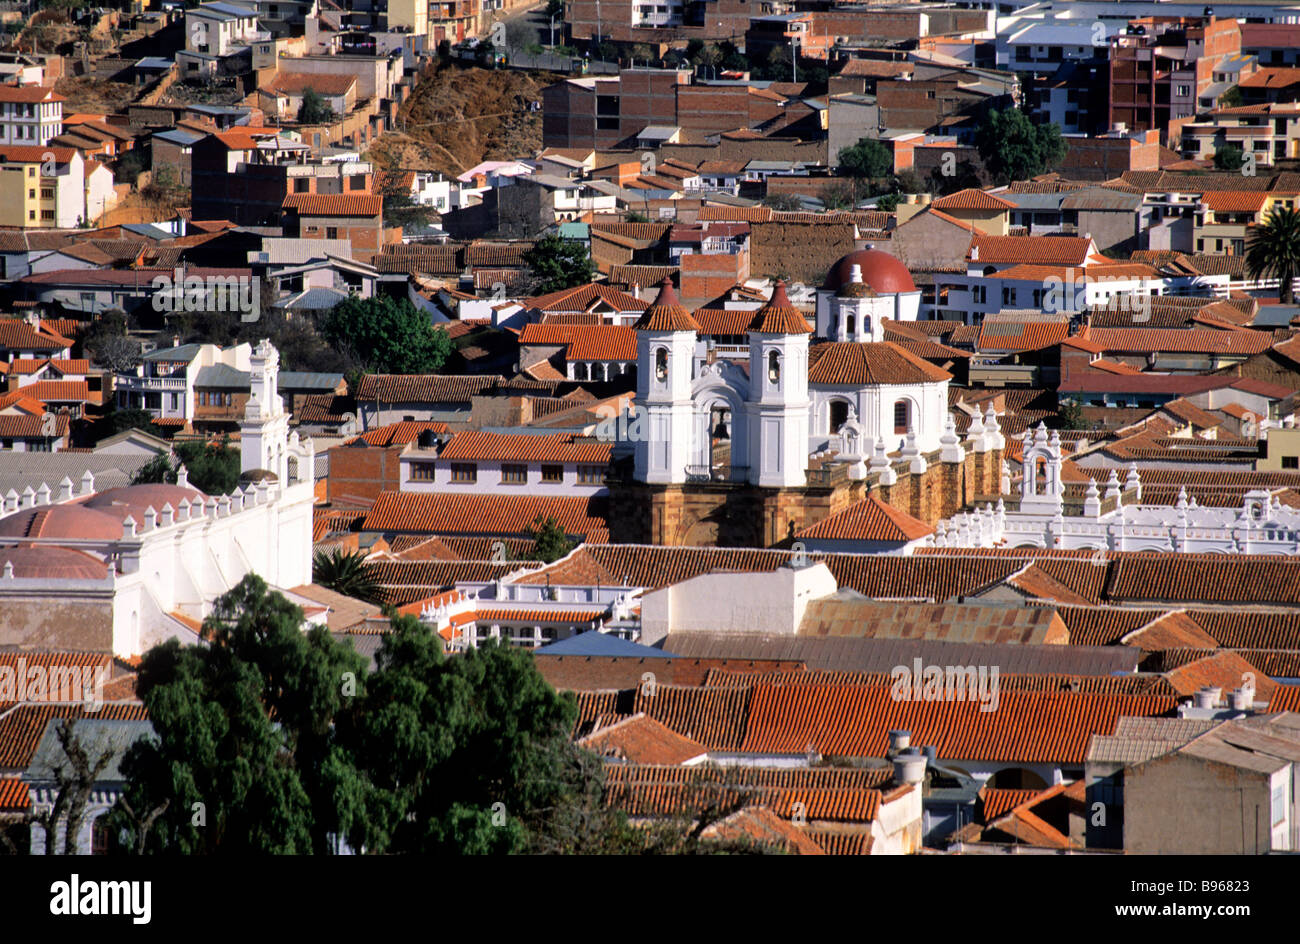 Bolivia, Chuquisaca Department, Sucre, town classified as World Heritage by UNESCO, San Felipe Neri Convent in the background Stock Photo